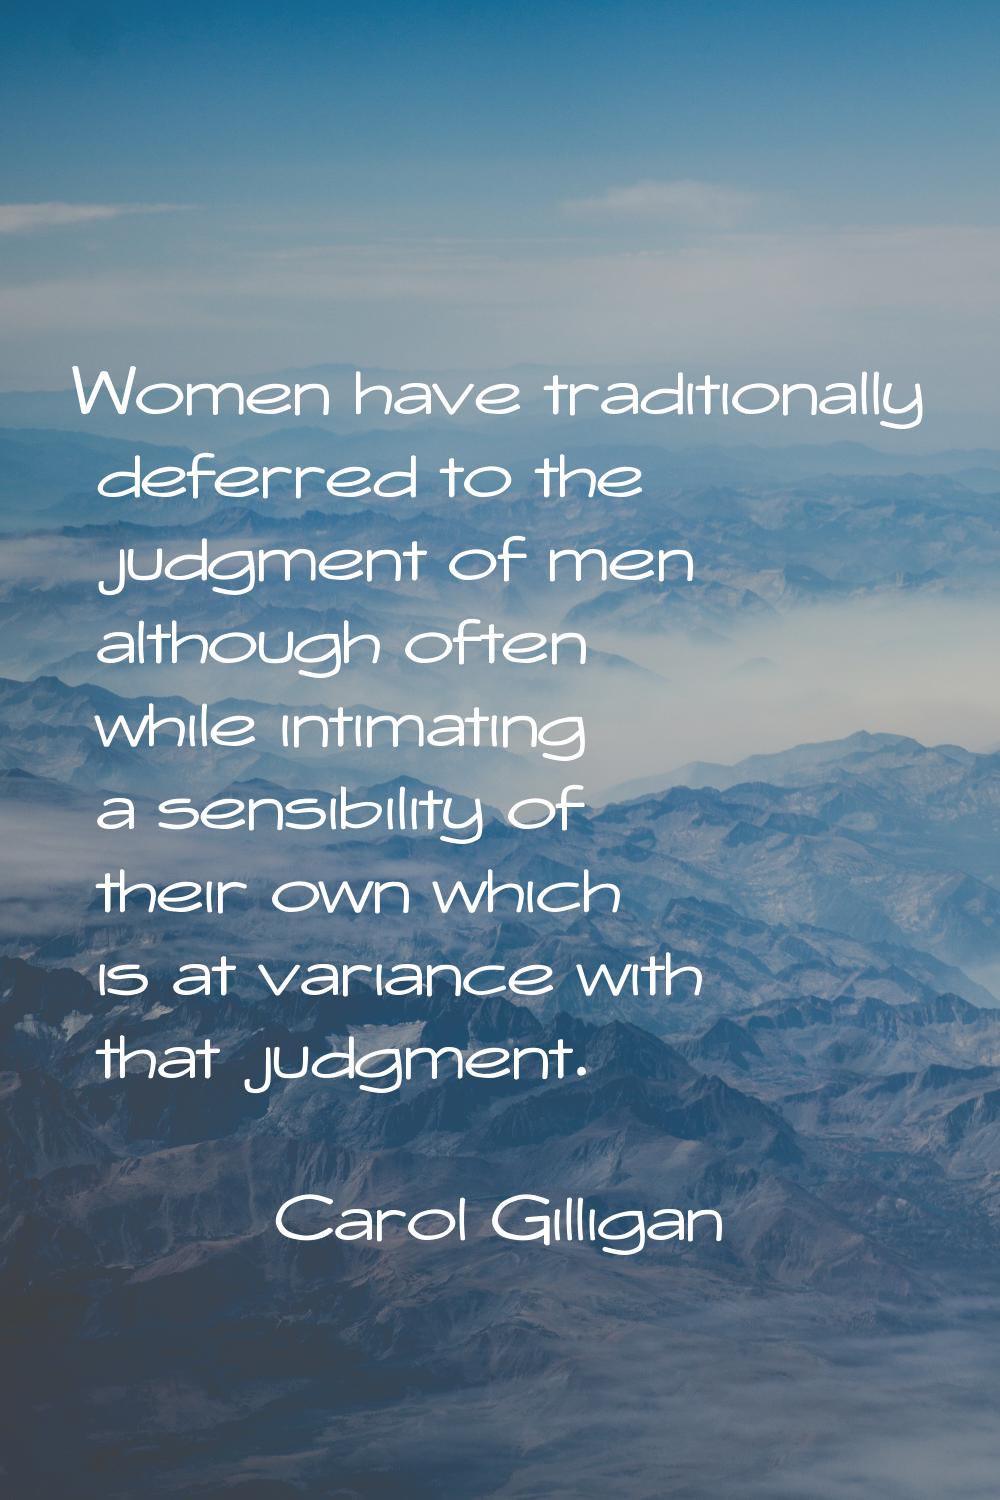 Women have traditionally deferred to the judgment of men although often while intimating a sensibil